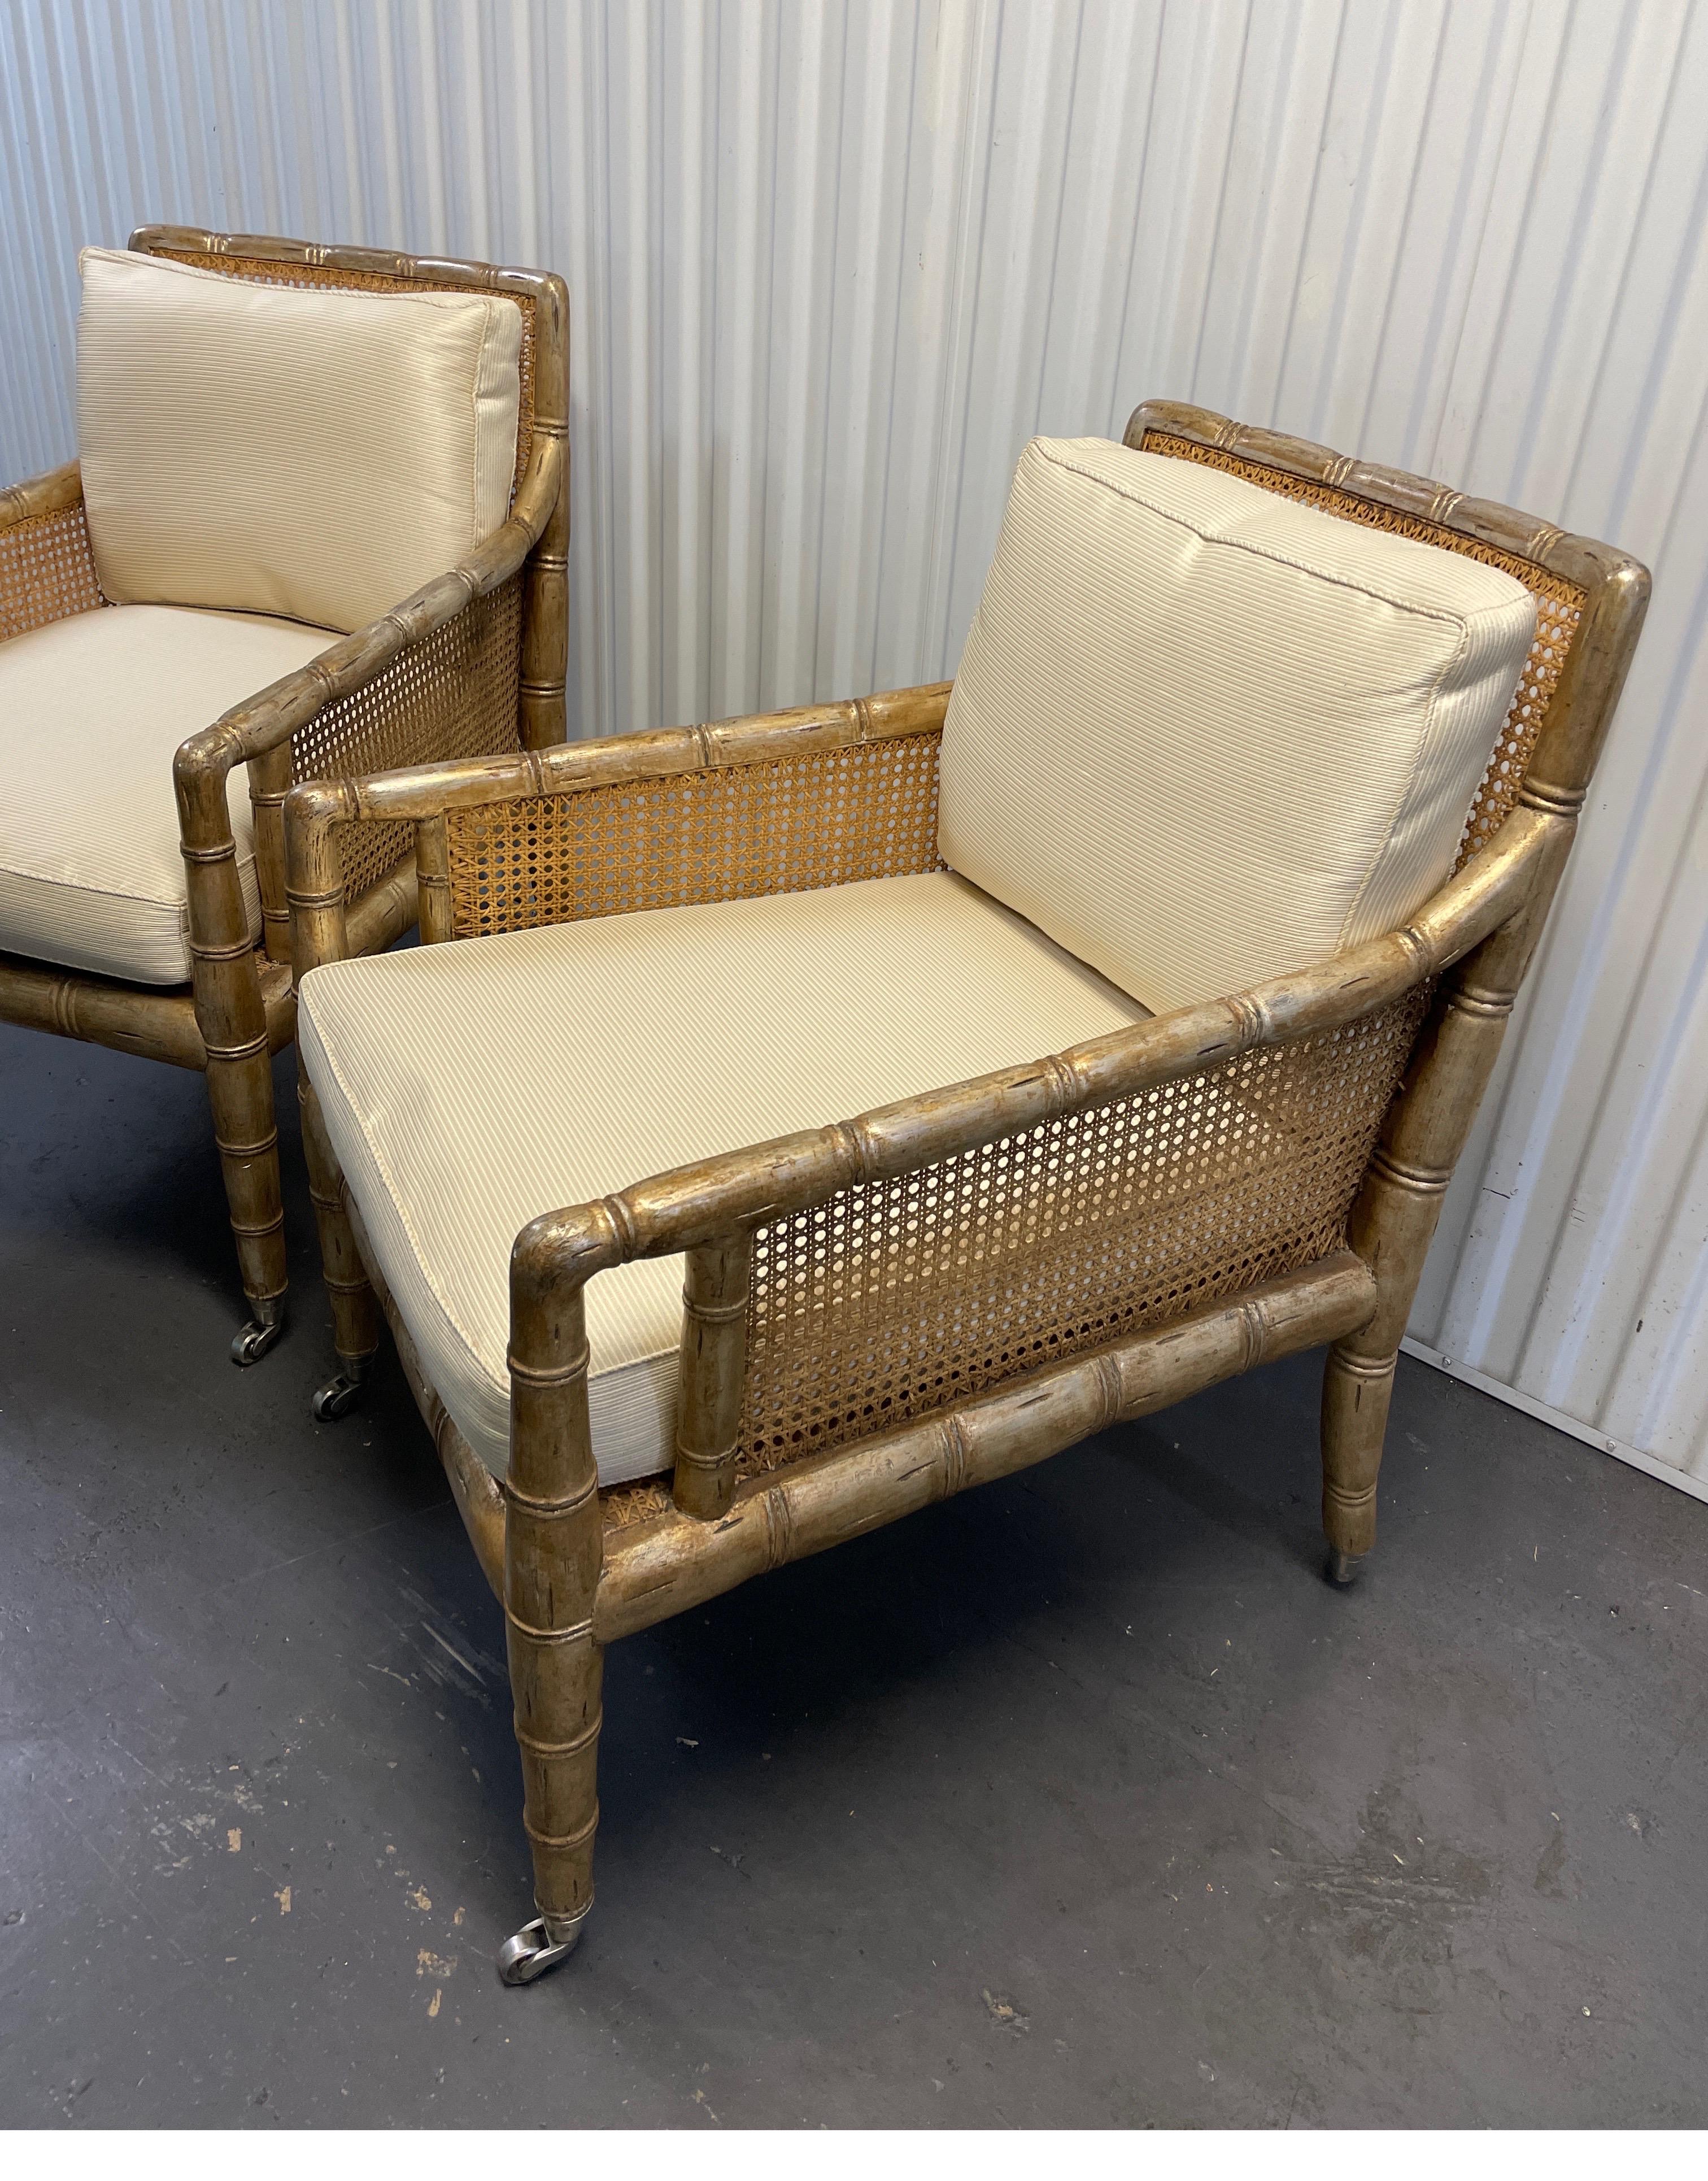 Vintage pair of gilded Hollywood Regency style faux bamboo & cane armchairs on castors with bone silk cushions.